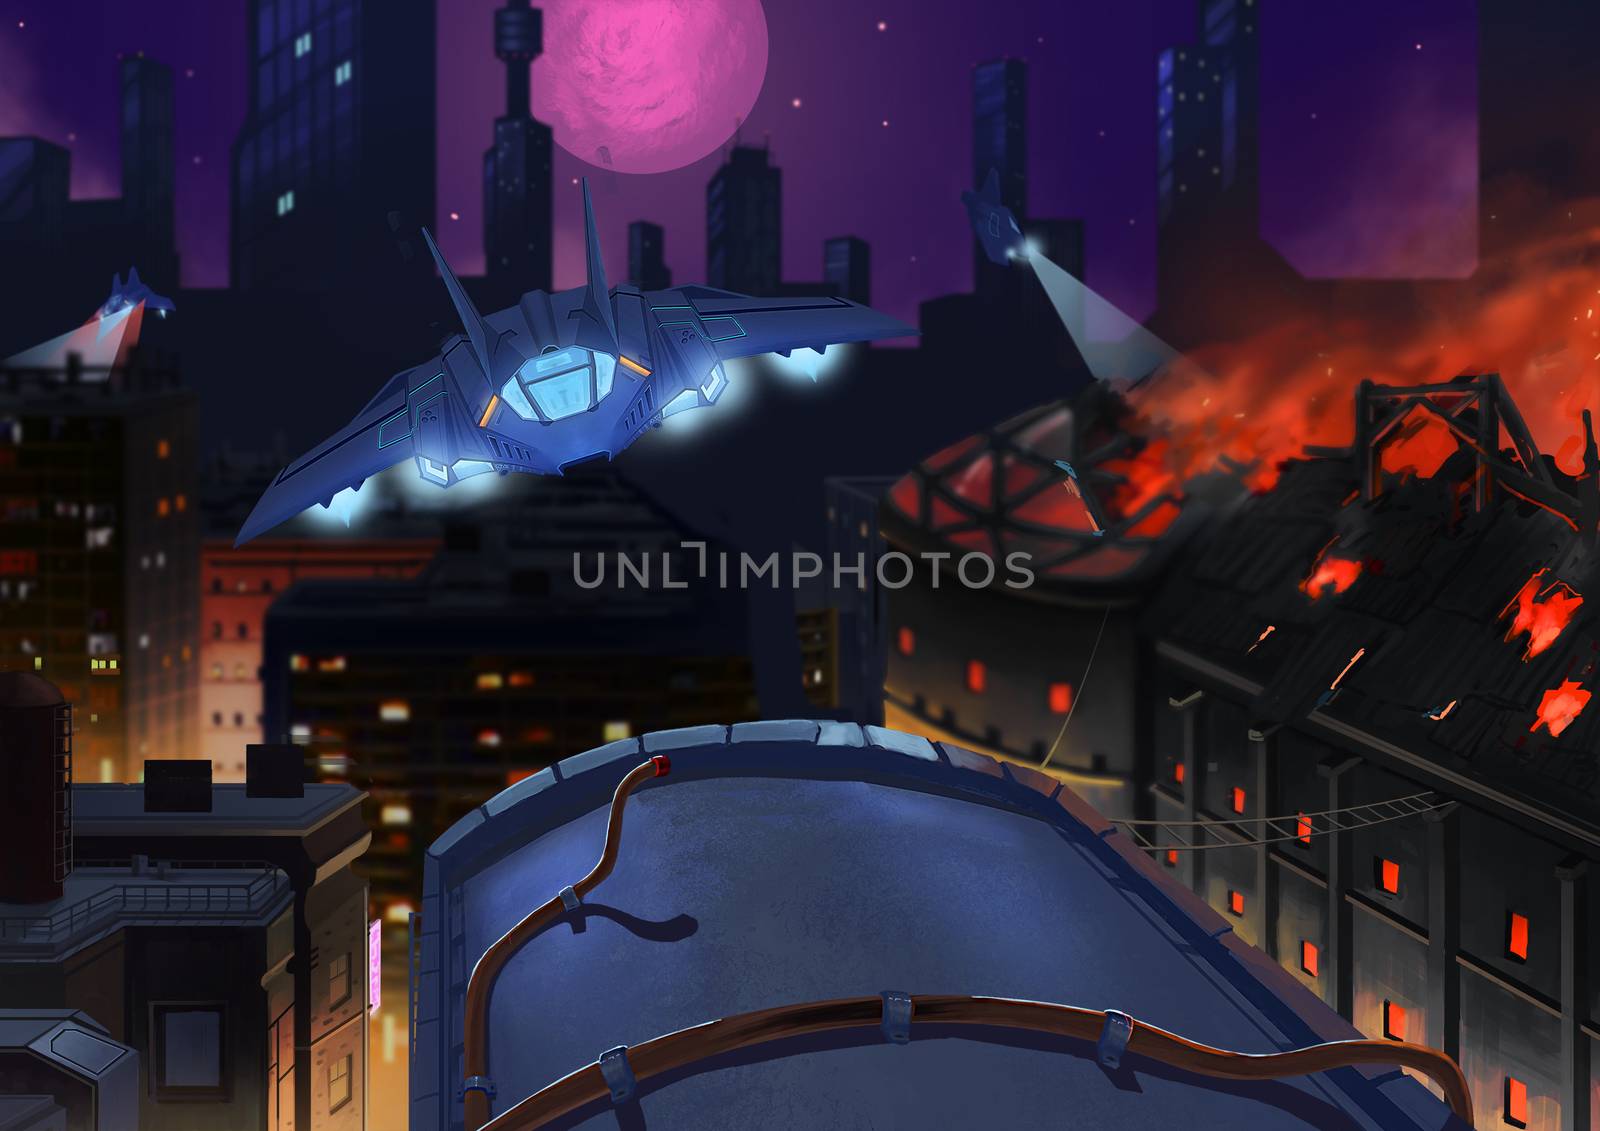 Illustration: The Occupied City On Fire. The Alien's Fighter Airplane goes out on Patrol and Search to Suppress the Rebel Forces. Story with Fantastic Cartoon Style Scene Wallpaper Background Design.